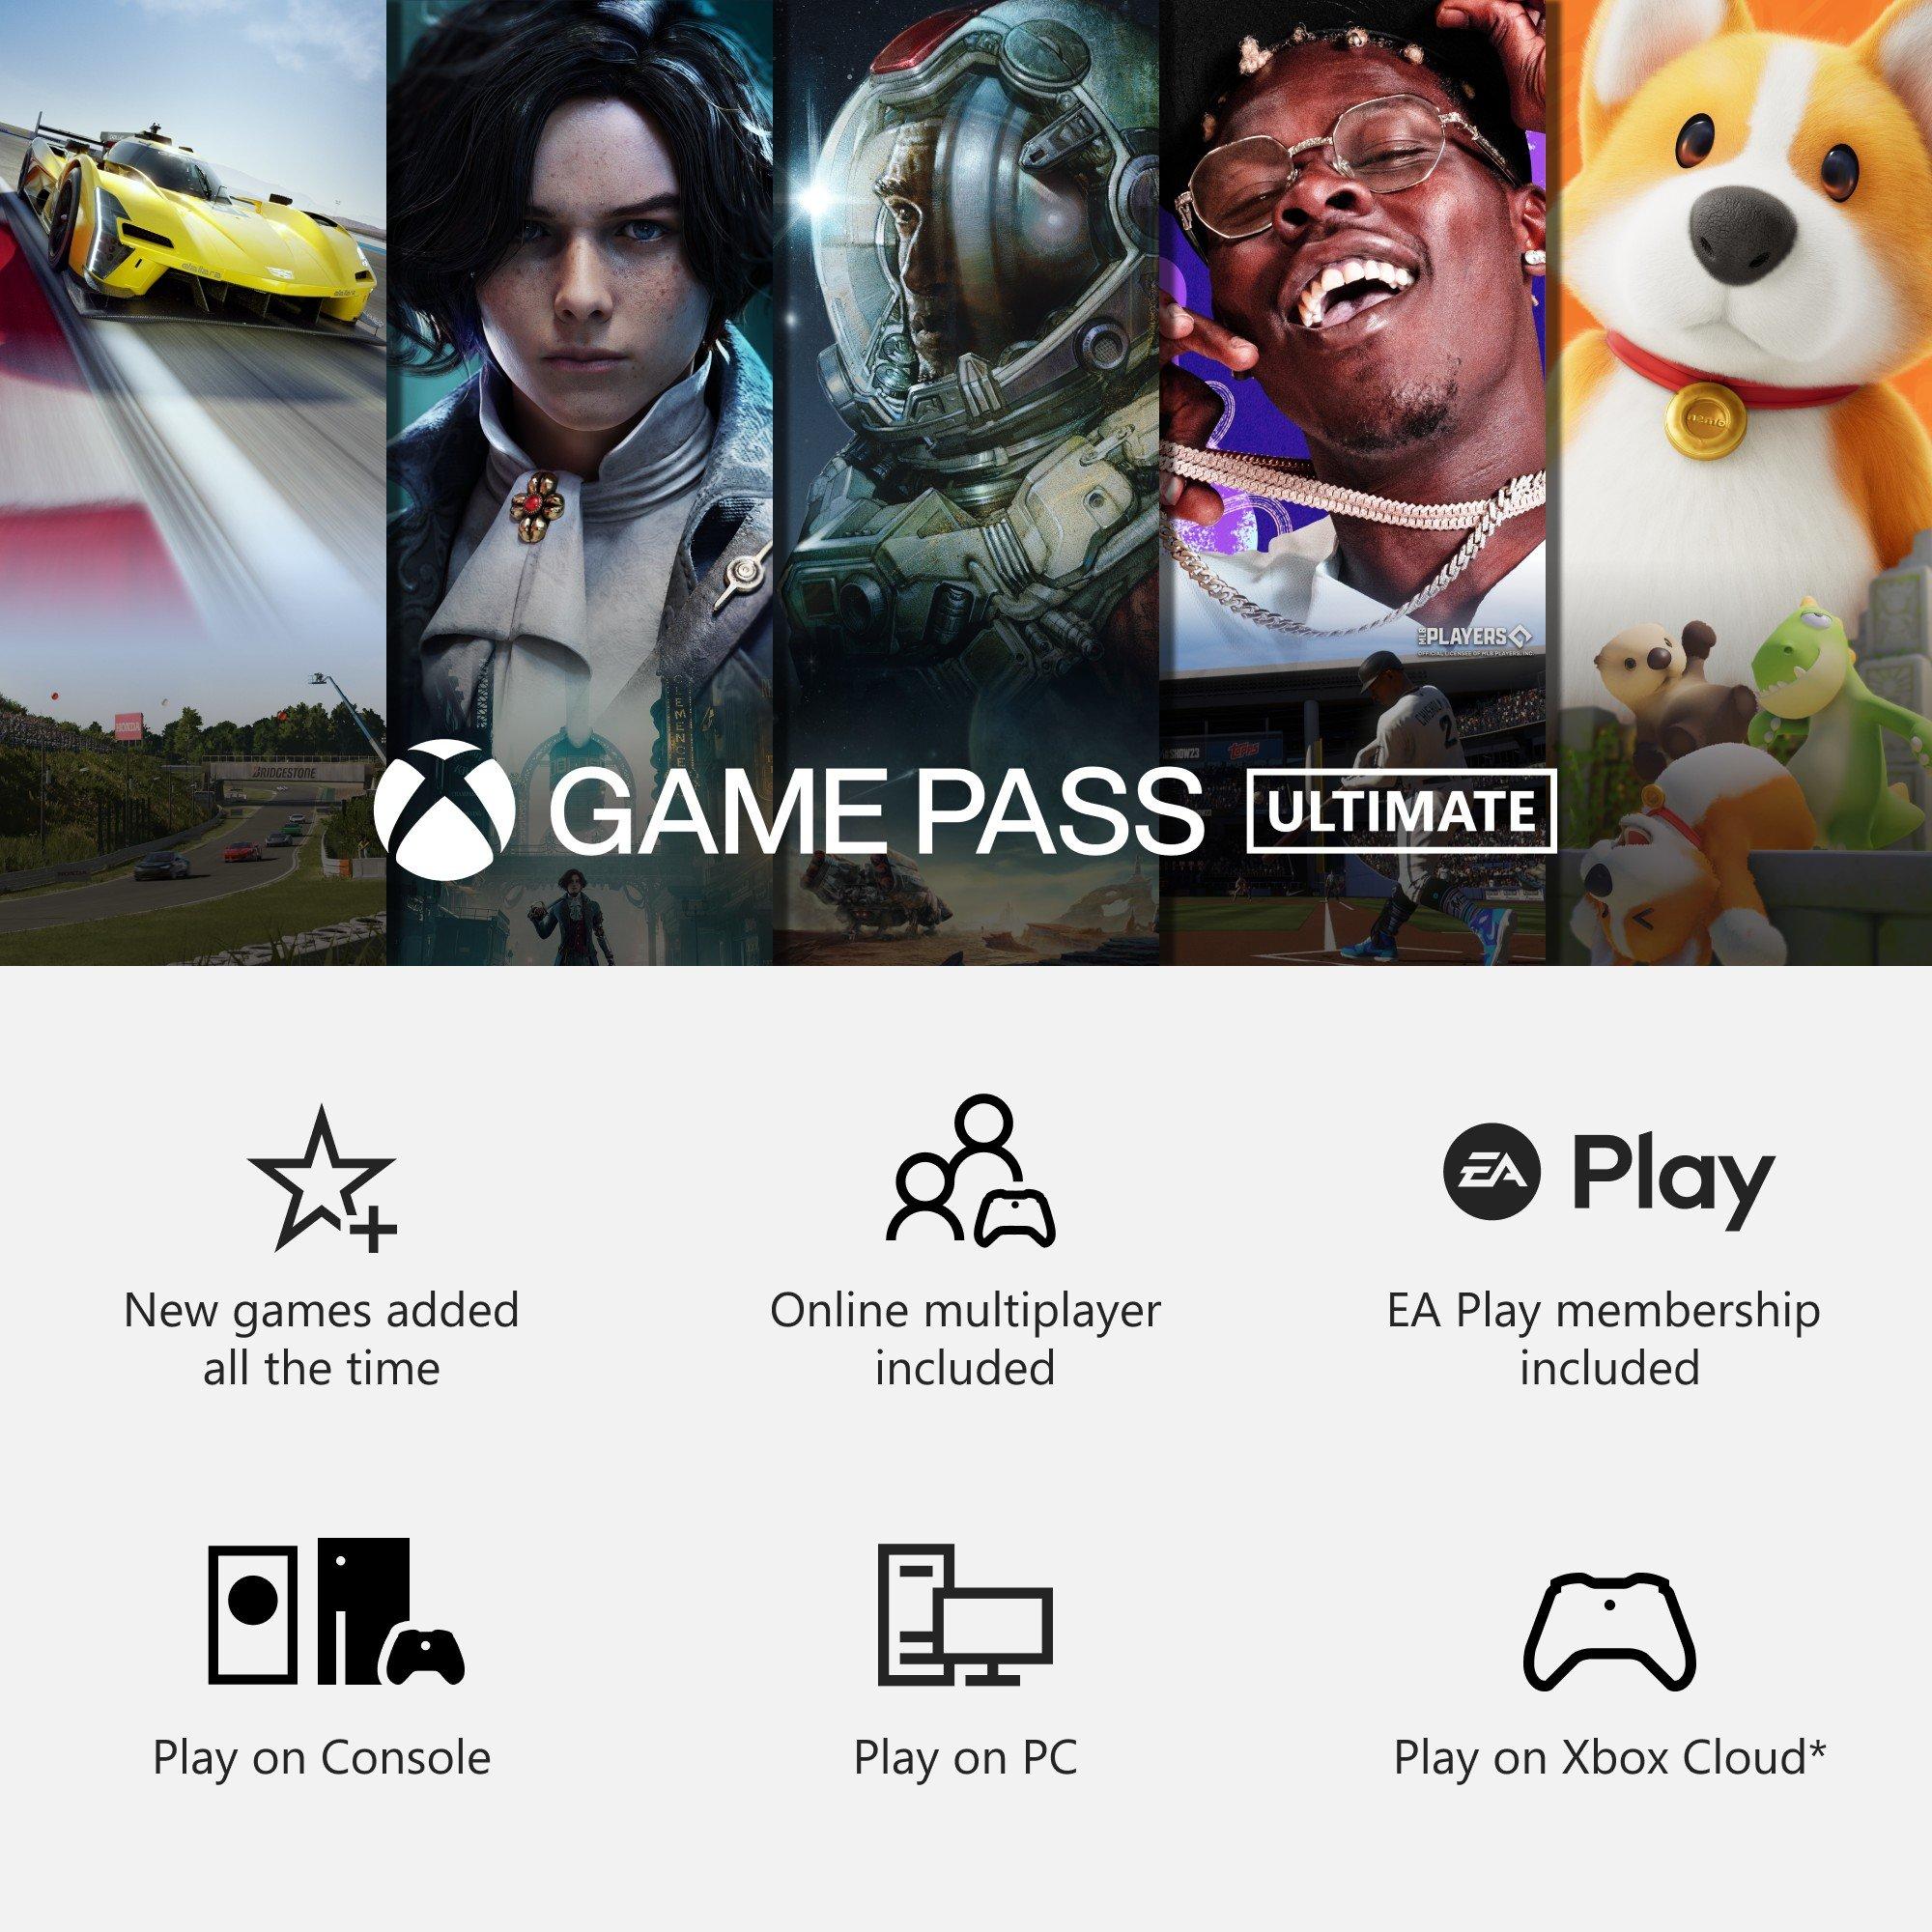 12 month xbox ultimate game pass